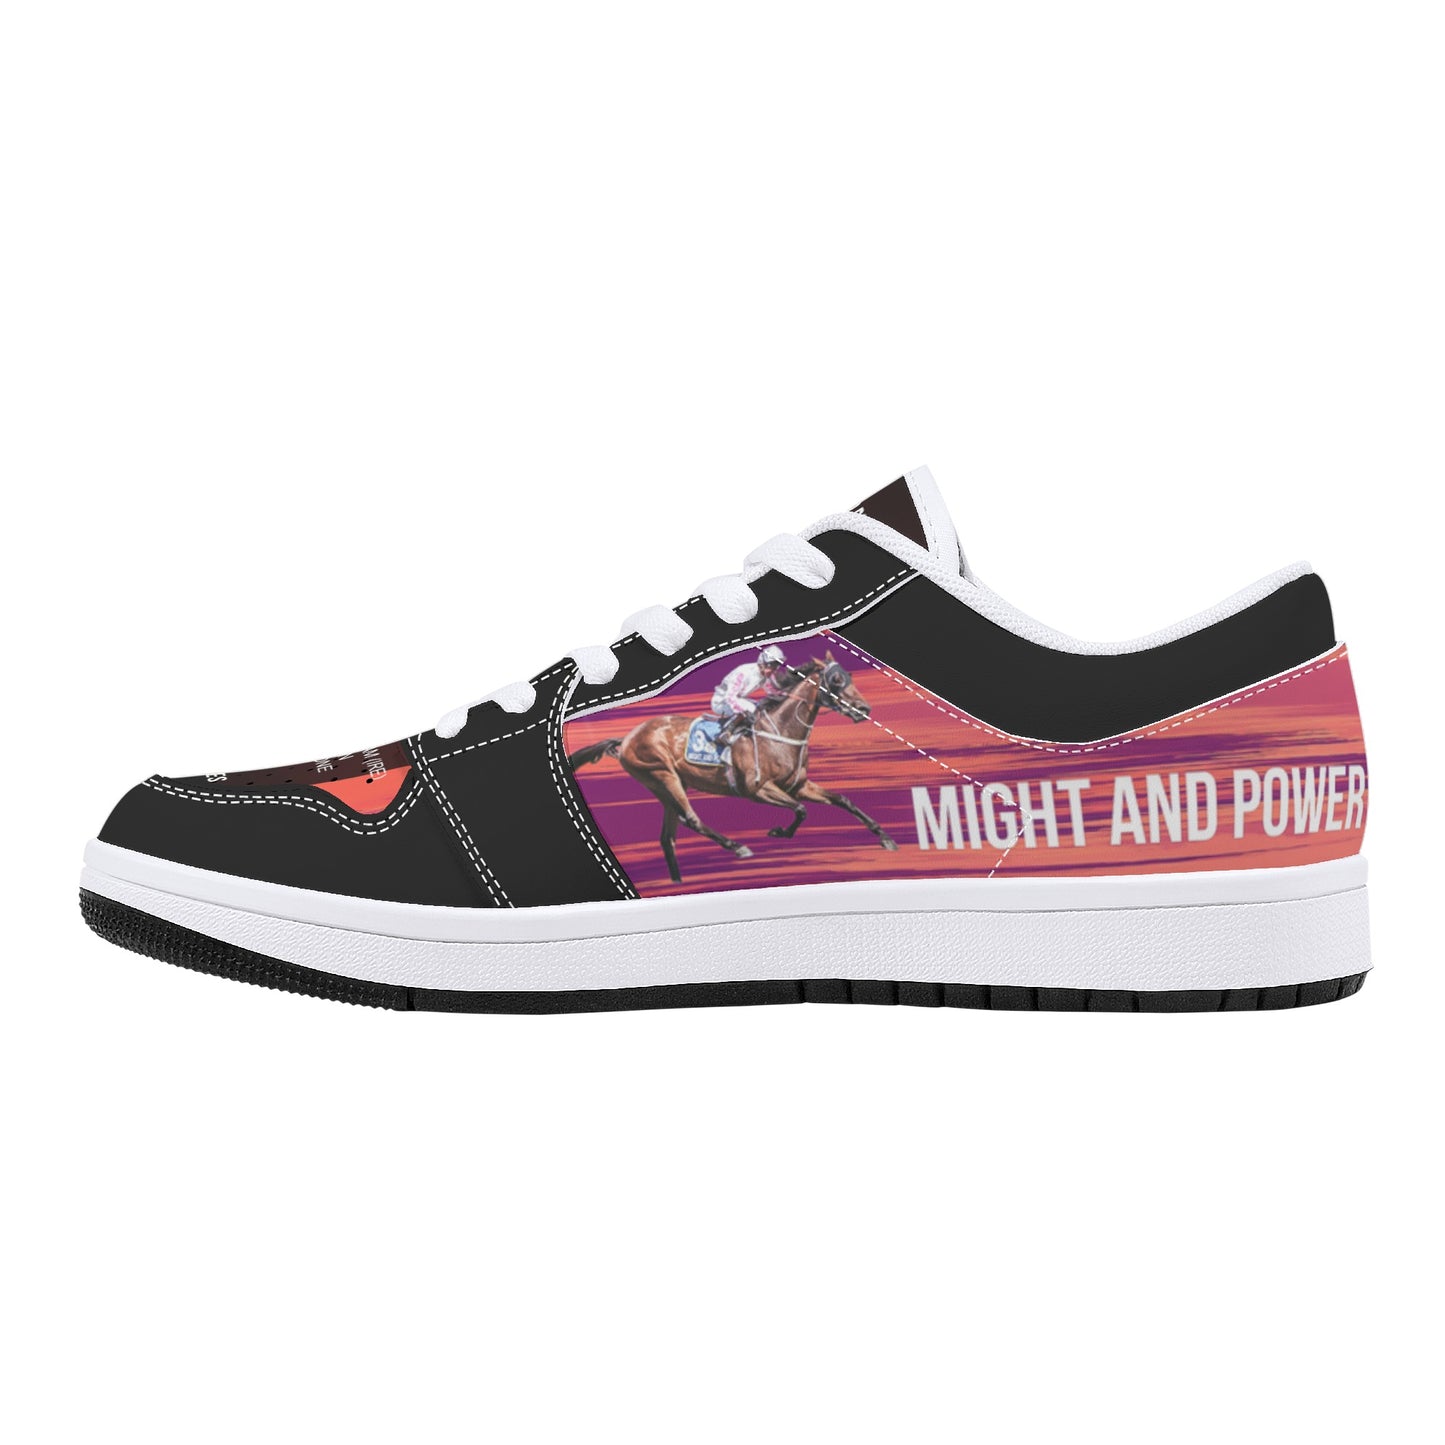 MIGHT AND POWER Mens Low Top Leather Sneakers